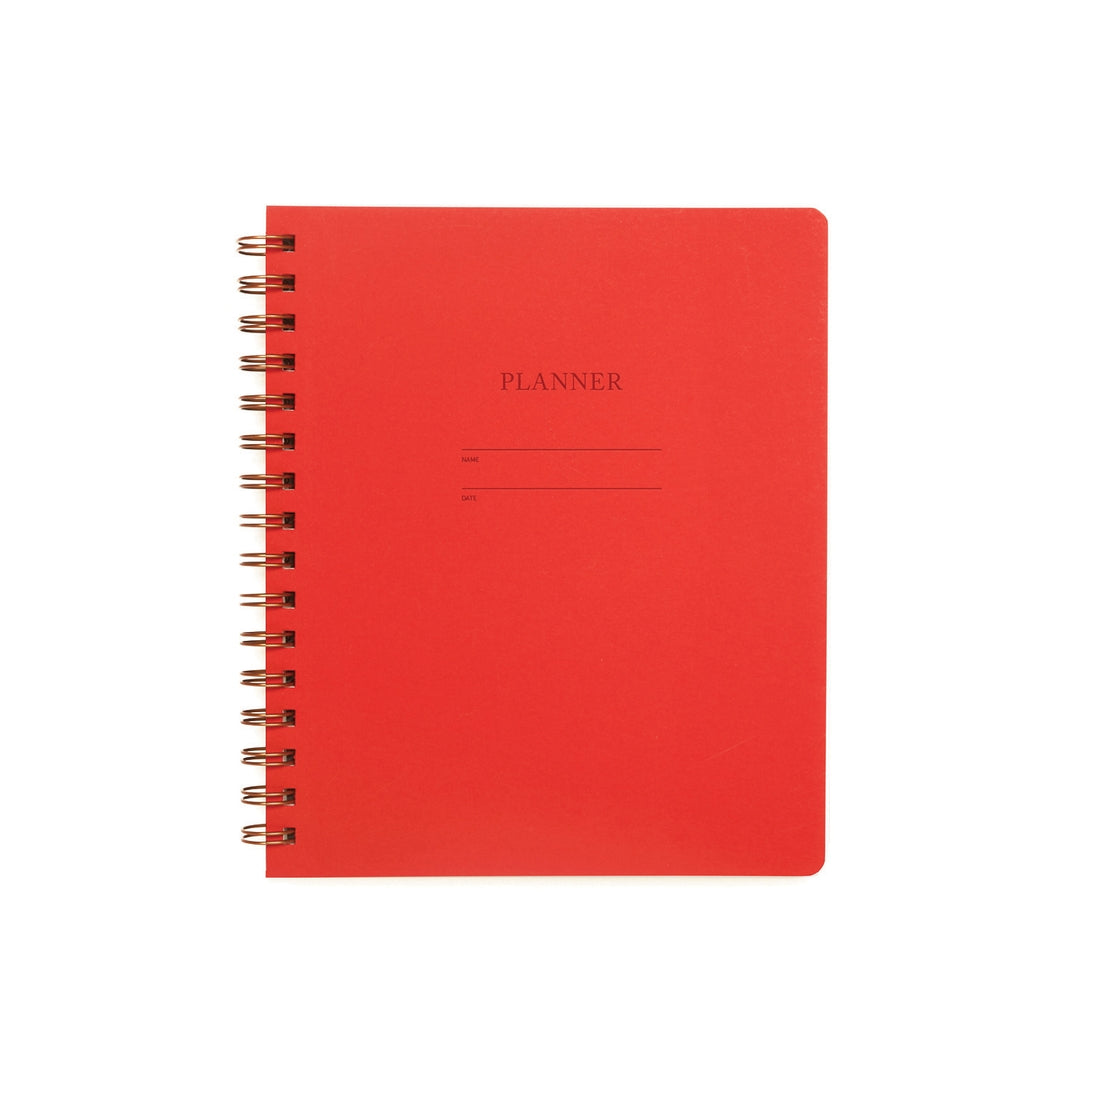 Image of red planner cover with letter pressed text says, “Planner”, “Name”, and “Date” with coil binding.